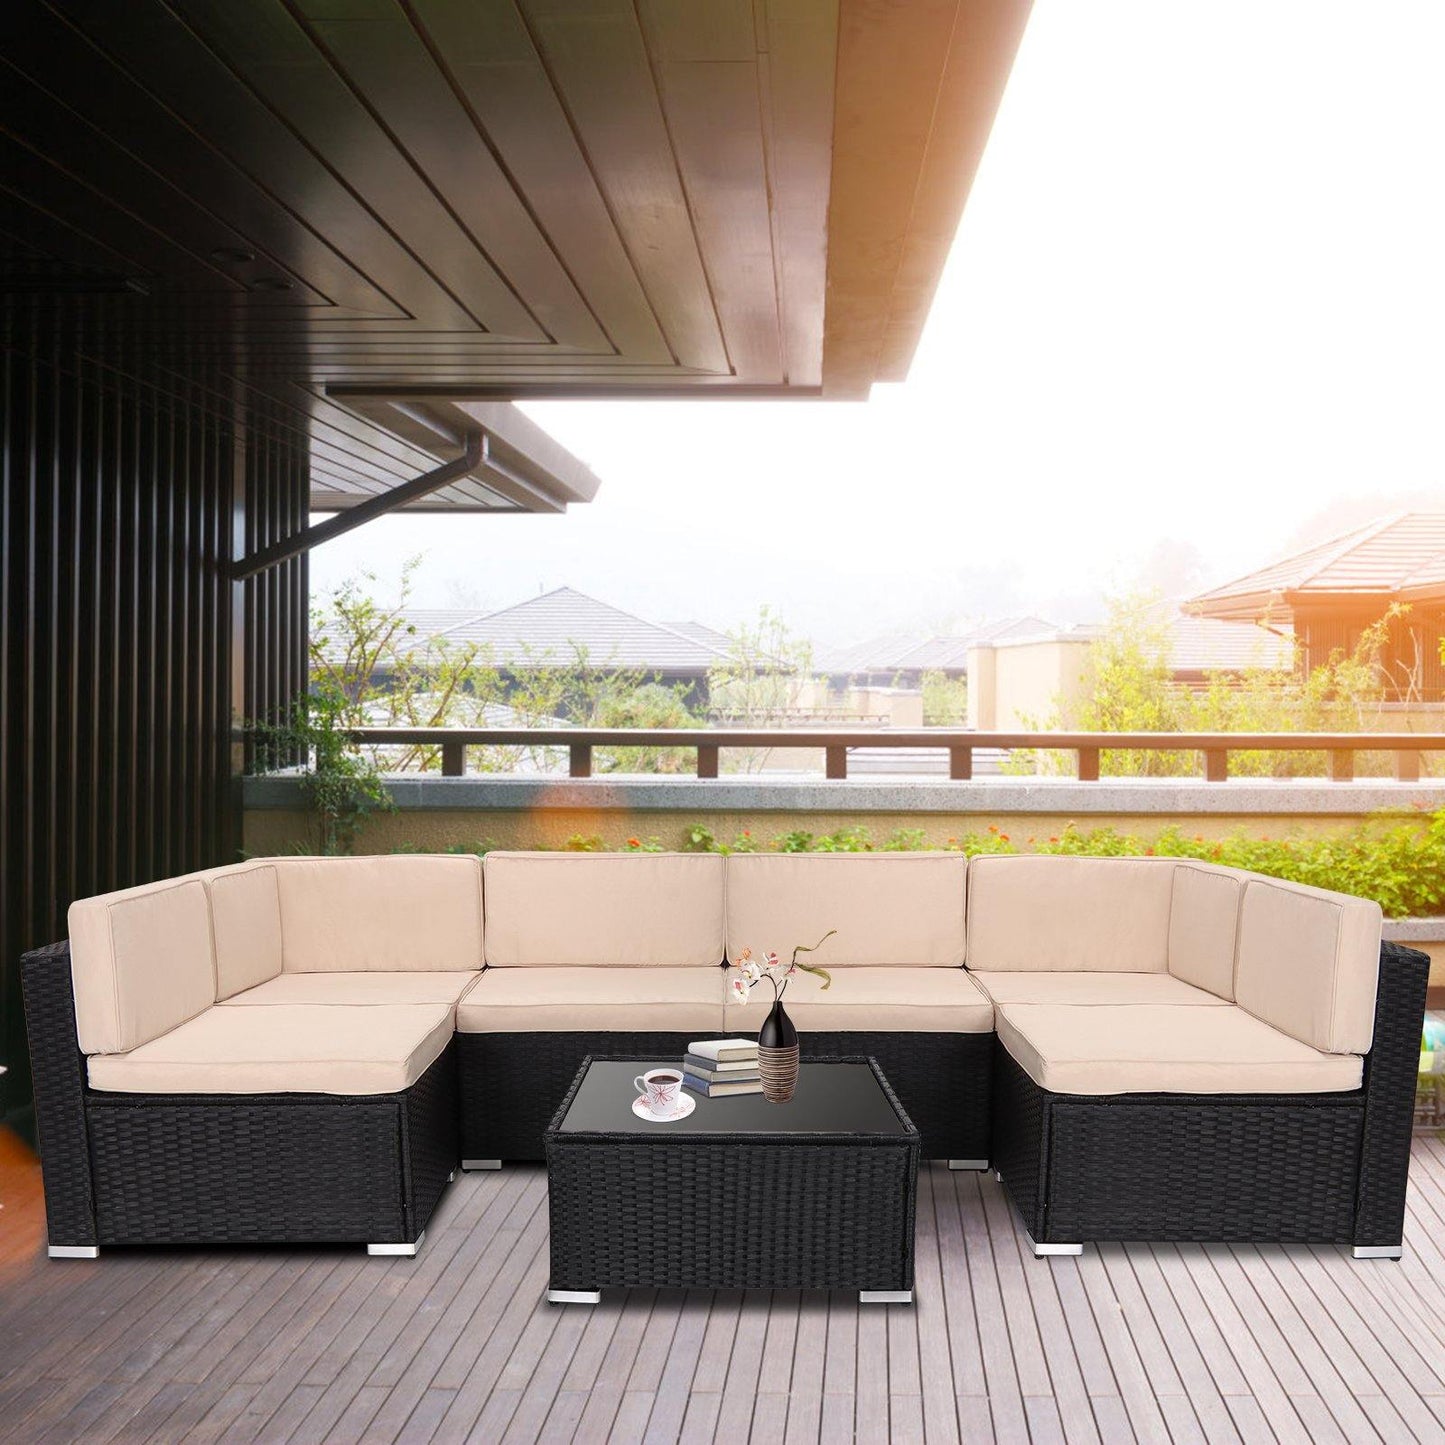 7 Pieces Outdoor Patio Furniture Sets Rattan Wicker Sofa Set - Golf and Leisure